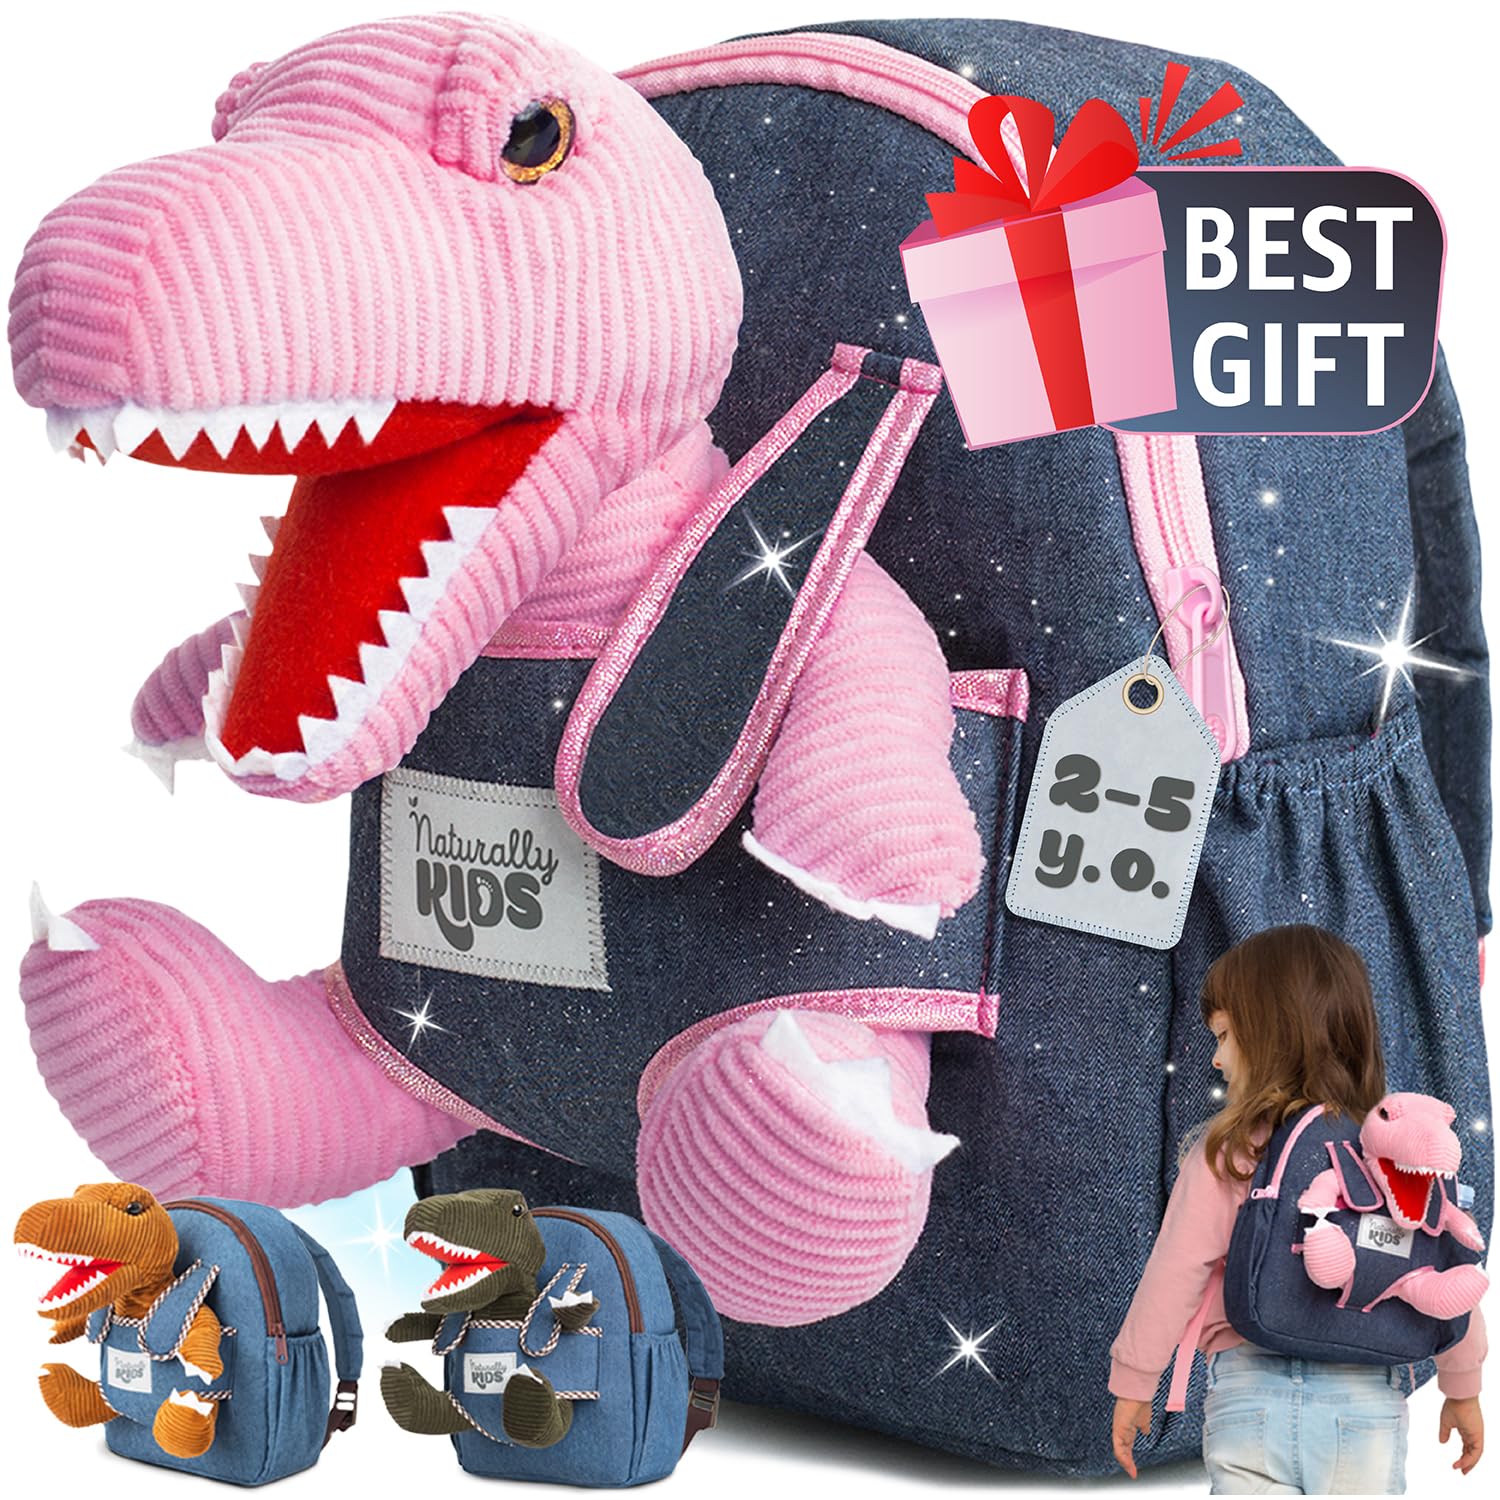 Pink Dinosaur Toys for 3-5 Year Old Girls, Toddler Christmas and Birthday Gifts 03 Small — Pink T-rex